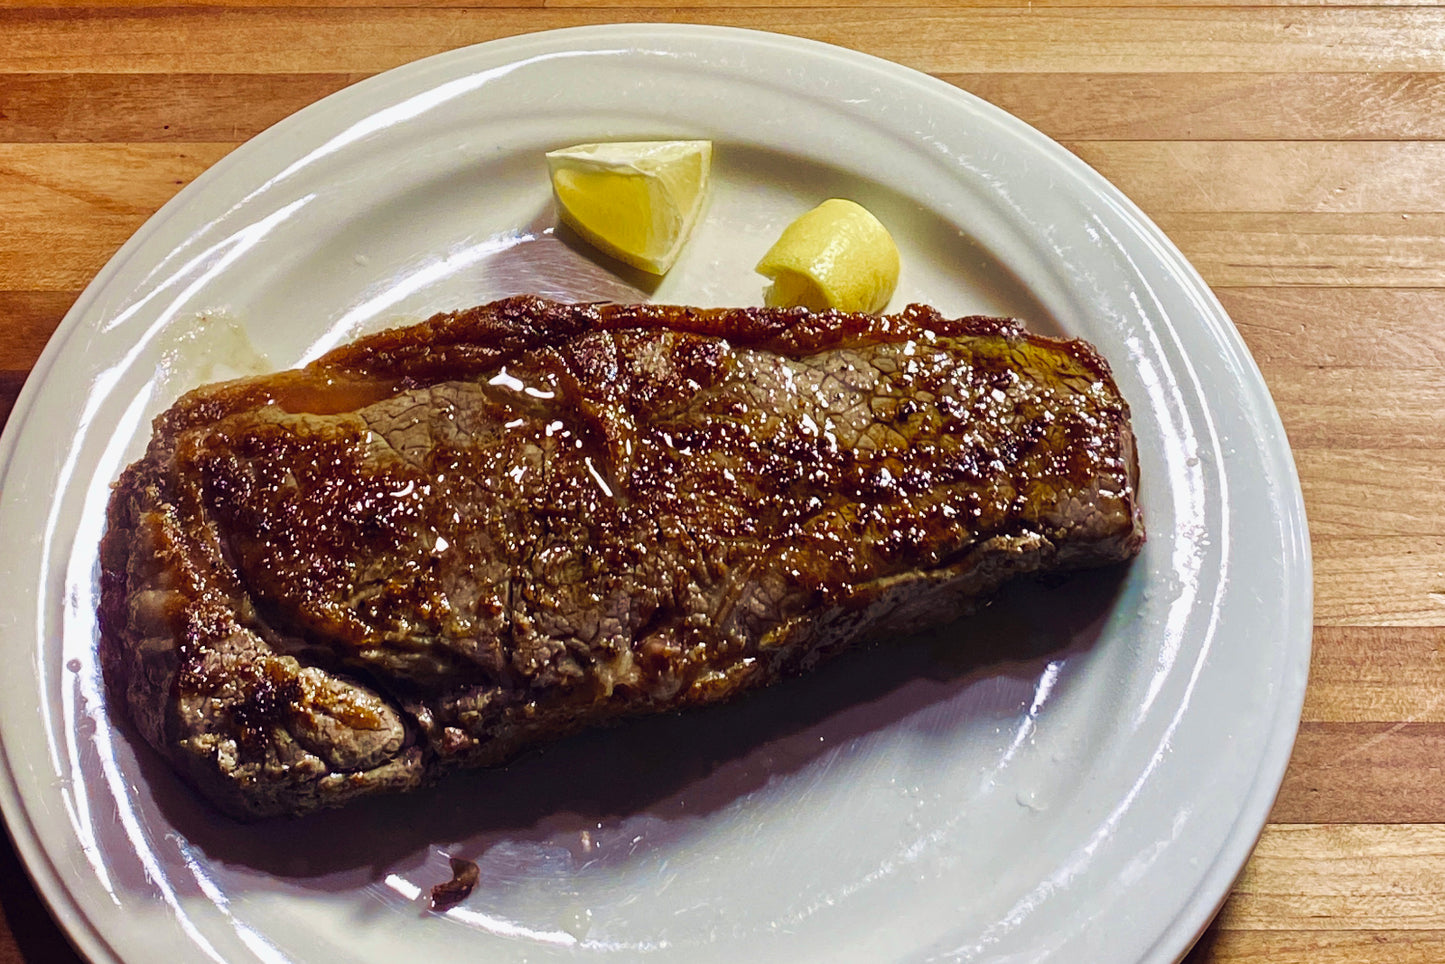 CAST IRON STEAK WITH OLIVE OIL AND LEMON